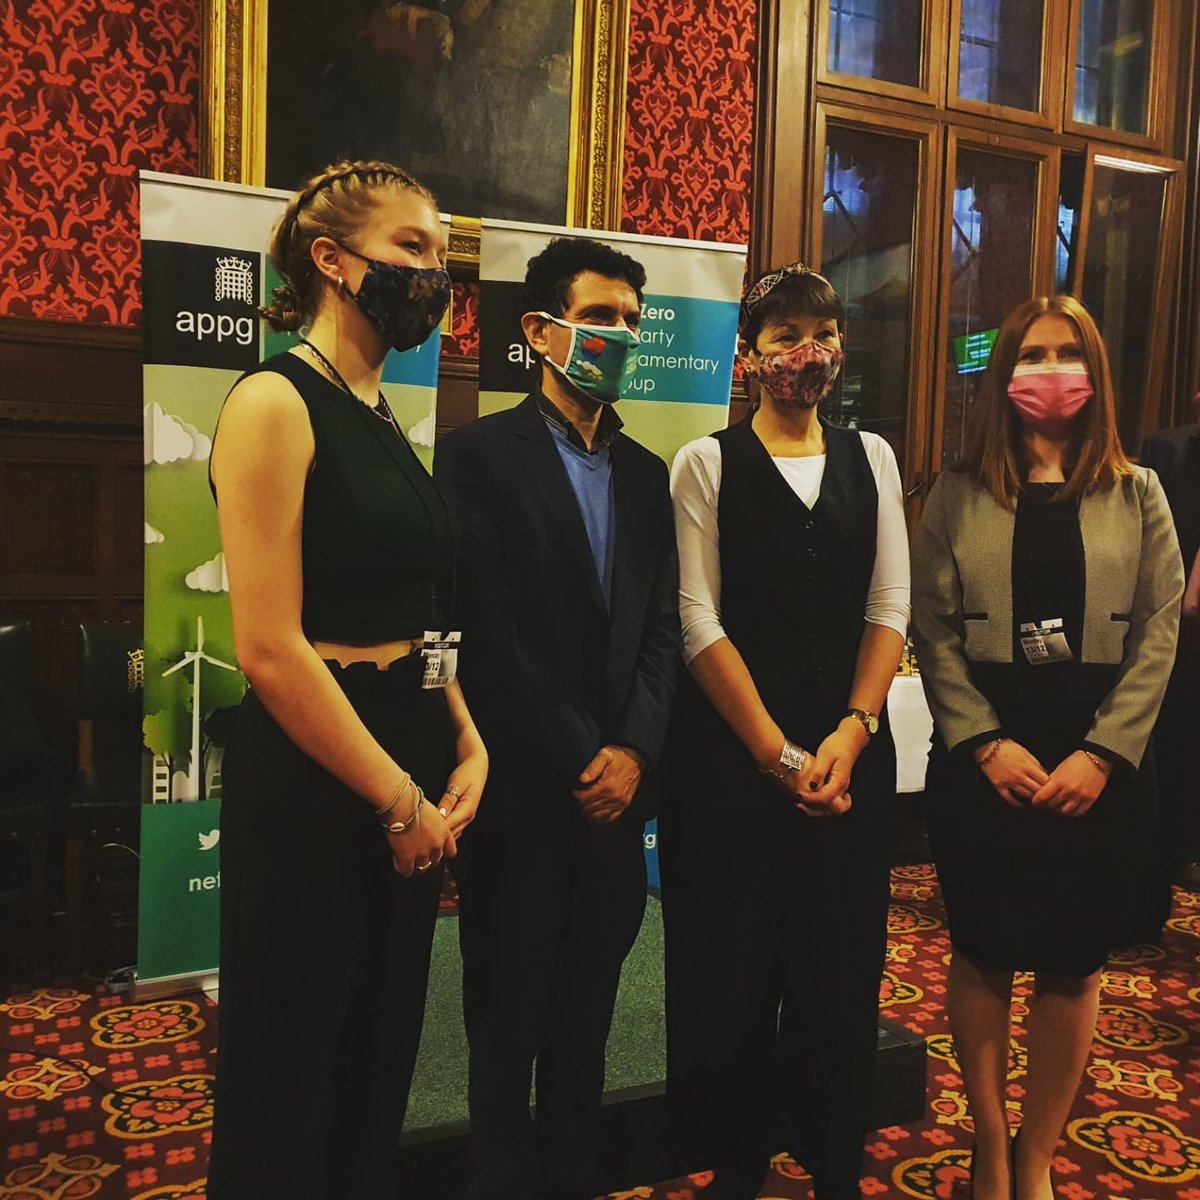 Yesterday, I spoke alongside @CarolineLucas MP and @alexsobel MP at the Net Zero APPG report launch in the House of Commons. My talk focused on solutions to decarbonise electricity generation by 2035. #engineeringnetzero #netzeroappg #getthejobdone #atkinsglobal